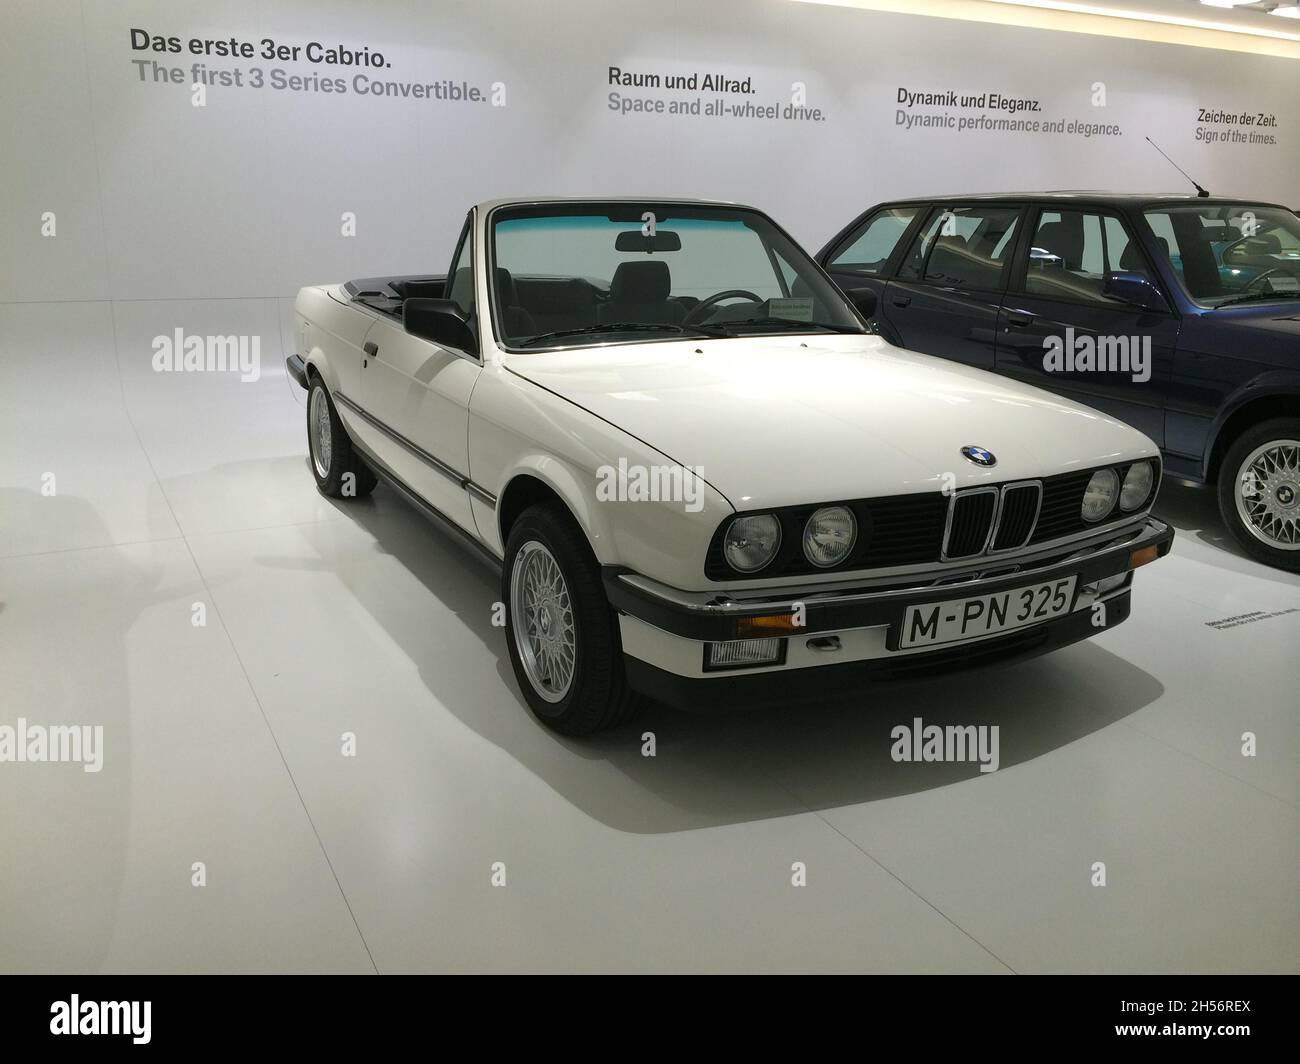 BMW 3 Series (E30): Front view, white color, cabriolet, 1st series 3 cabriolet, 2nd generation, manufactured in 1981-1994. BMW Museum, Munich - German Stock Photo